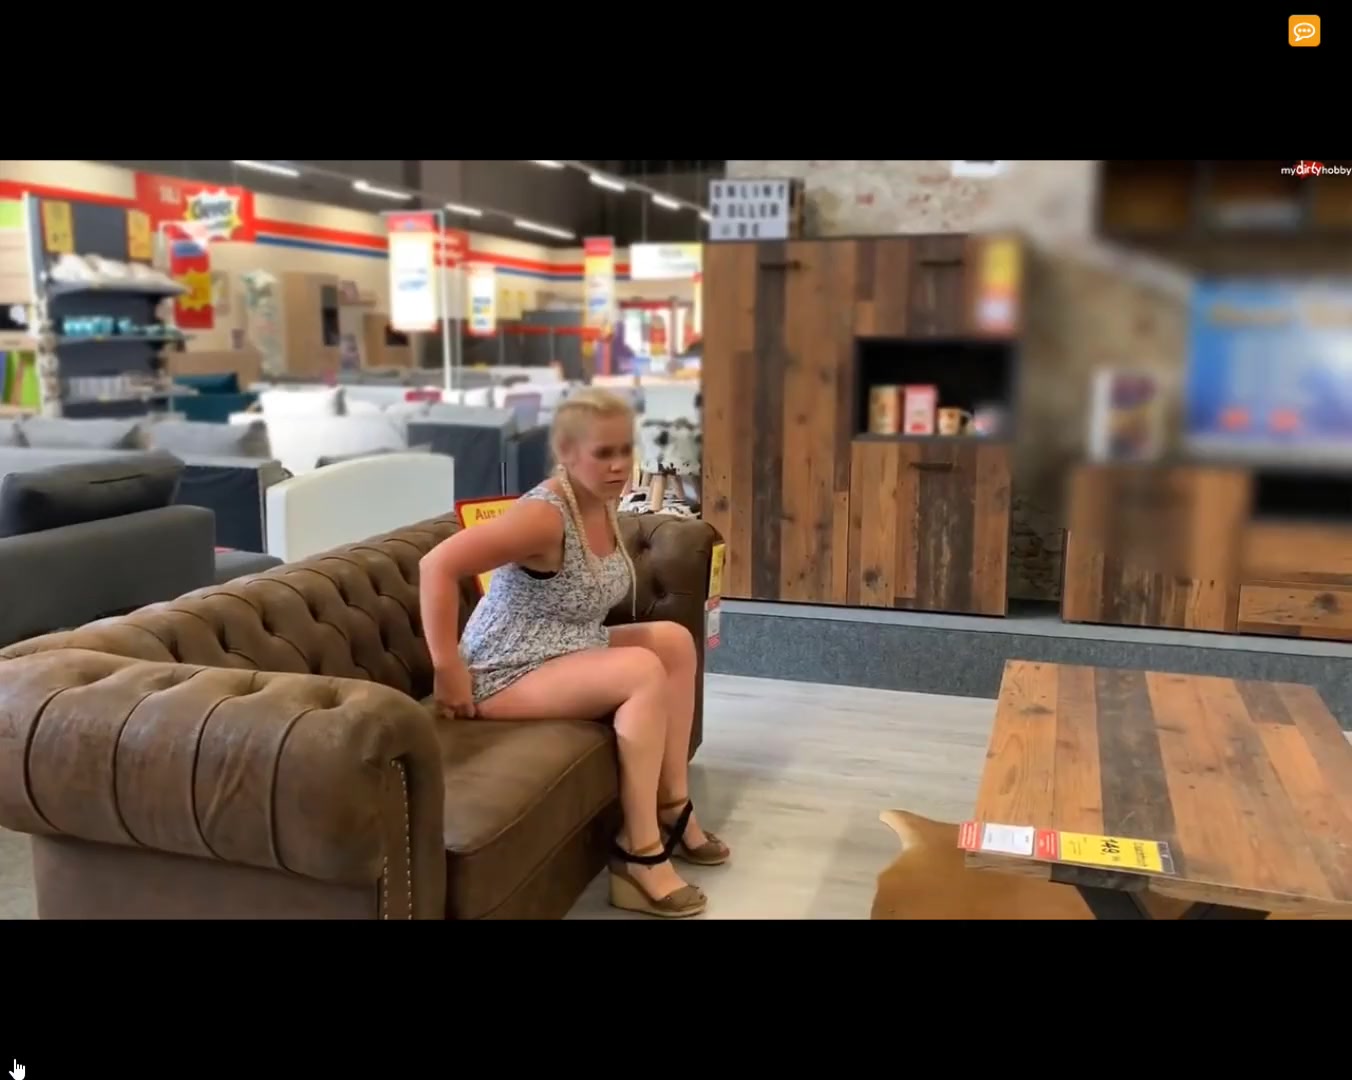 Woman pissing on a couch in furniture market pic photo